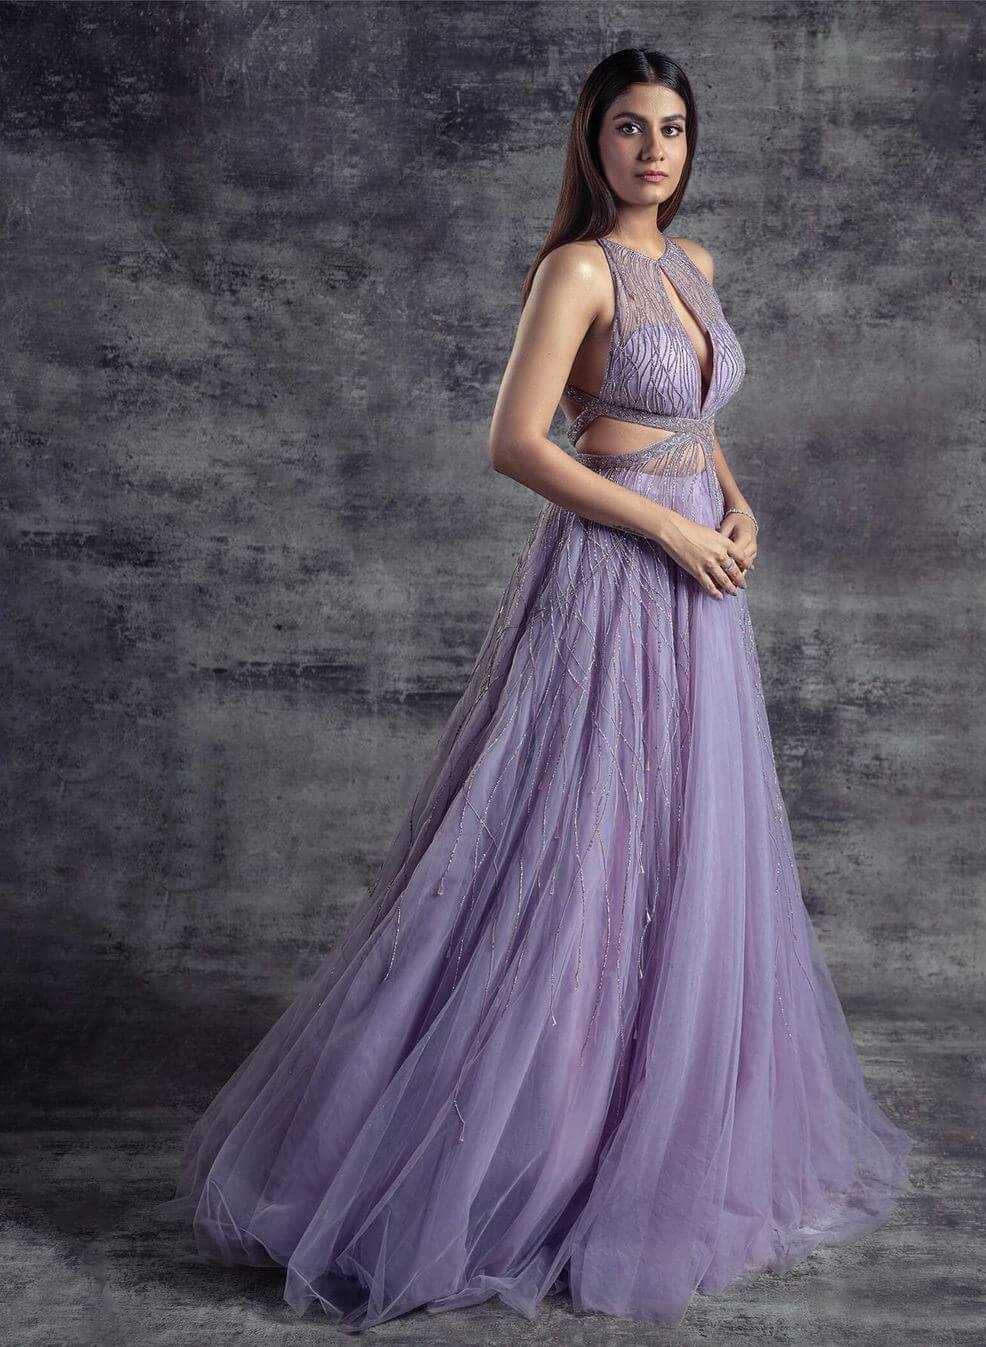 Shreya Dhanwanthary Look Beautiful In Purple Glittery Gown Outfit Shreya Dhanwanthary Fashionable Looks And Outfit